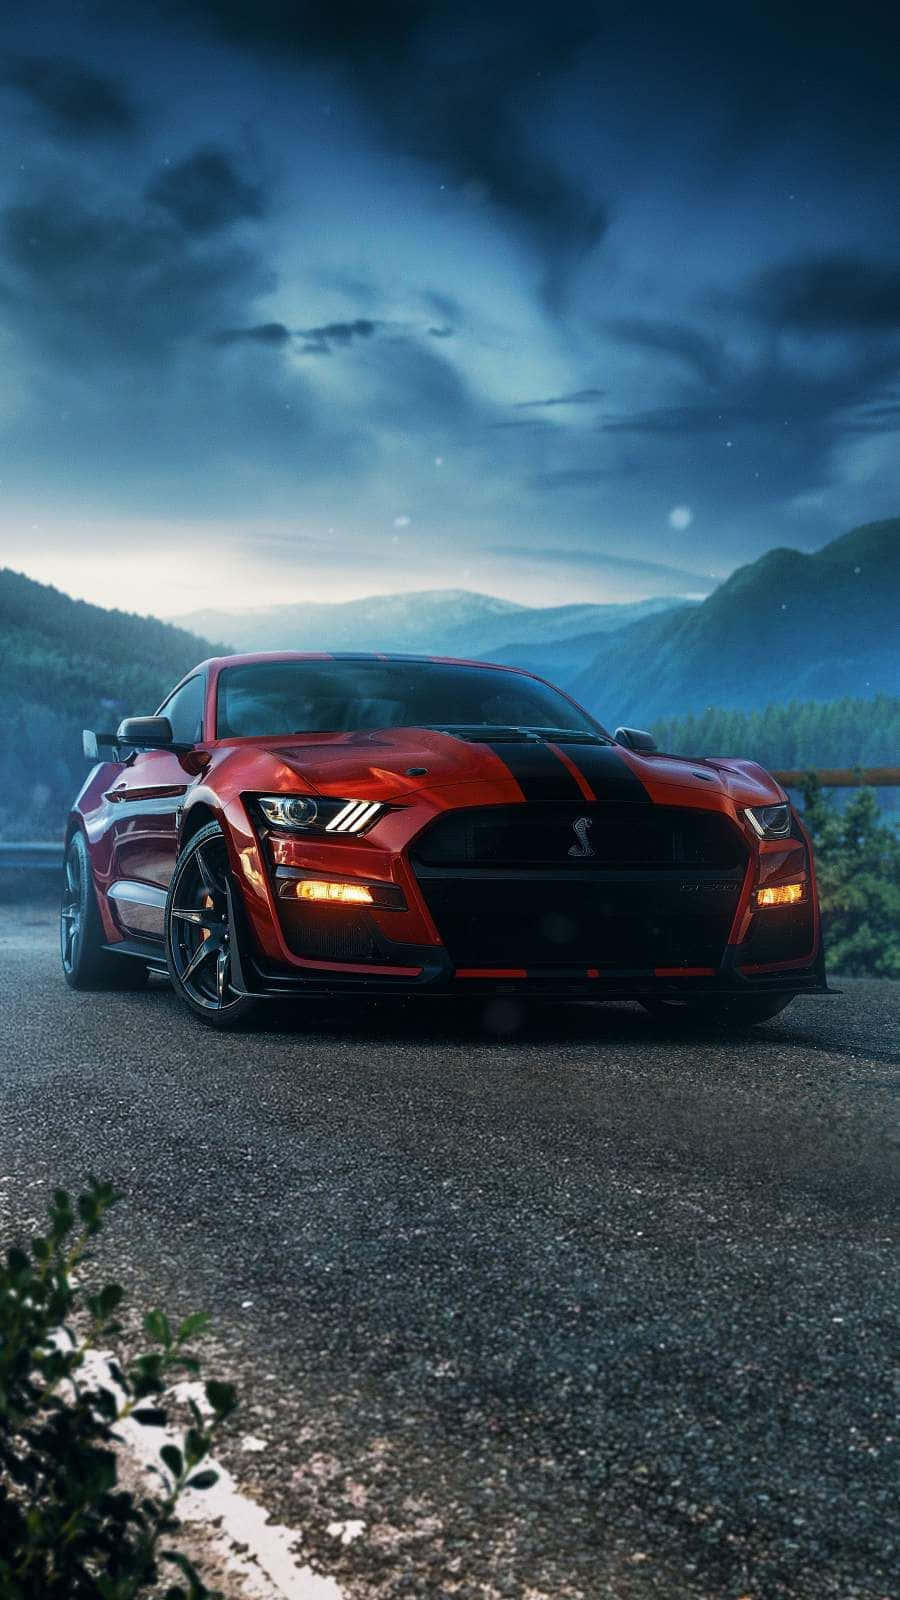 Shelby Ford Mustang On The Road Wallpaper